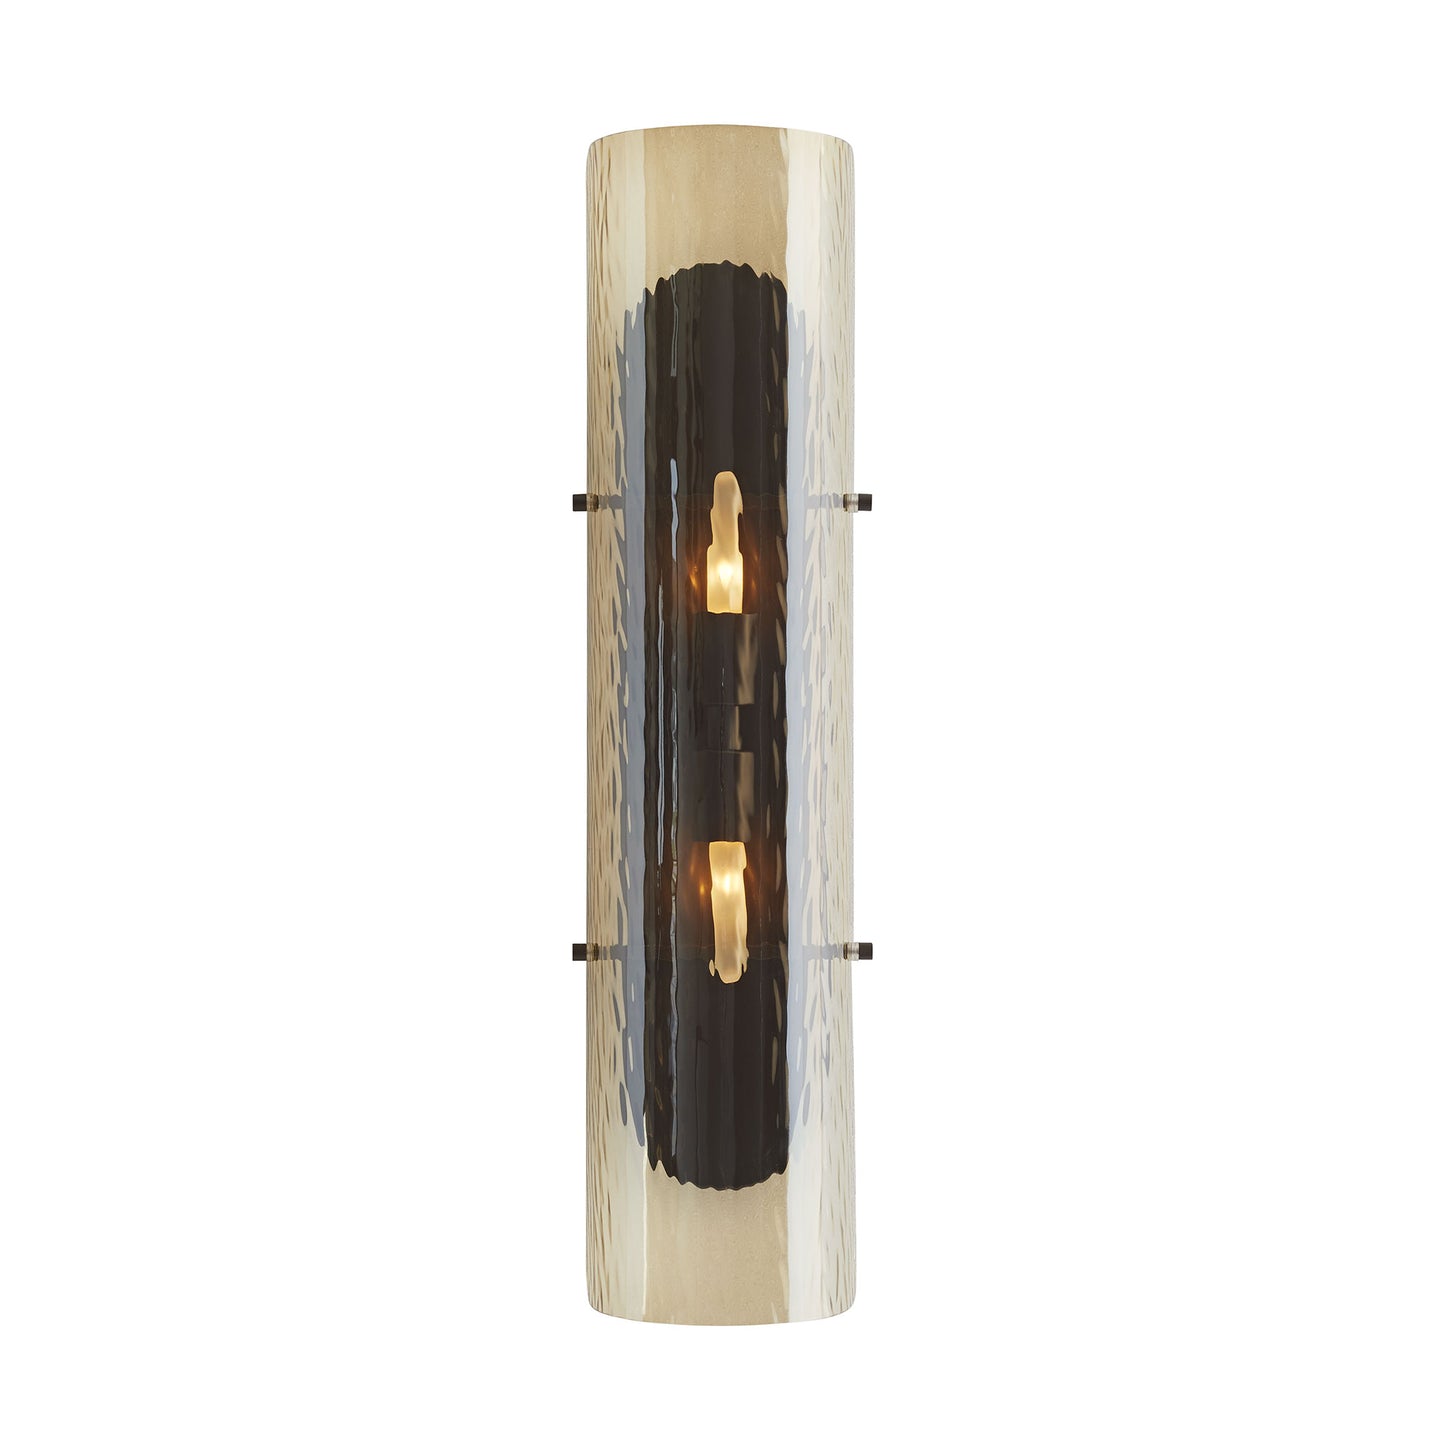 Bend Sconce - Blackened Steel, Amber Luster Glass